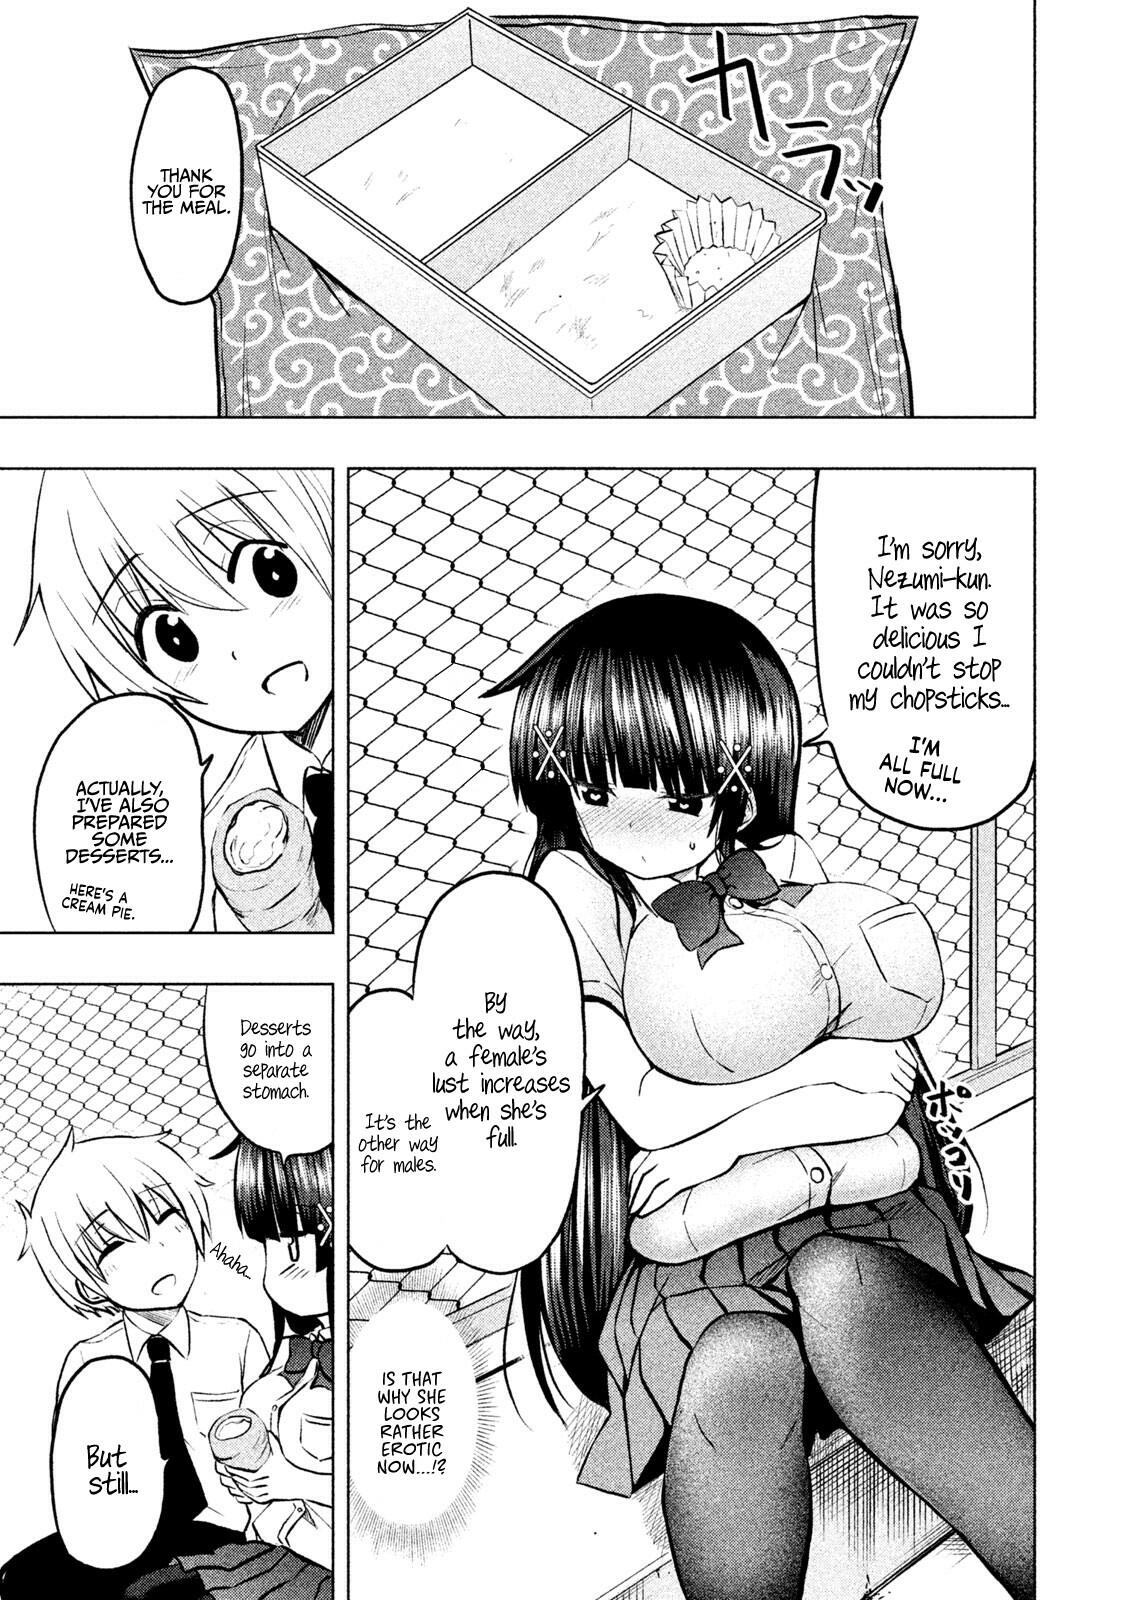 A Girl Who Is Very Well-Informed About Weird Knowledge, Takayukashiki Souko-San Chapter 21: Lunch Box page 8 - Mangakakalots.com